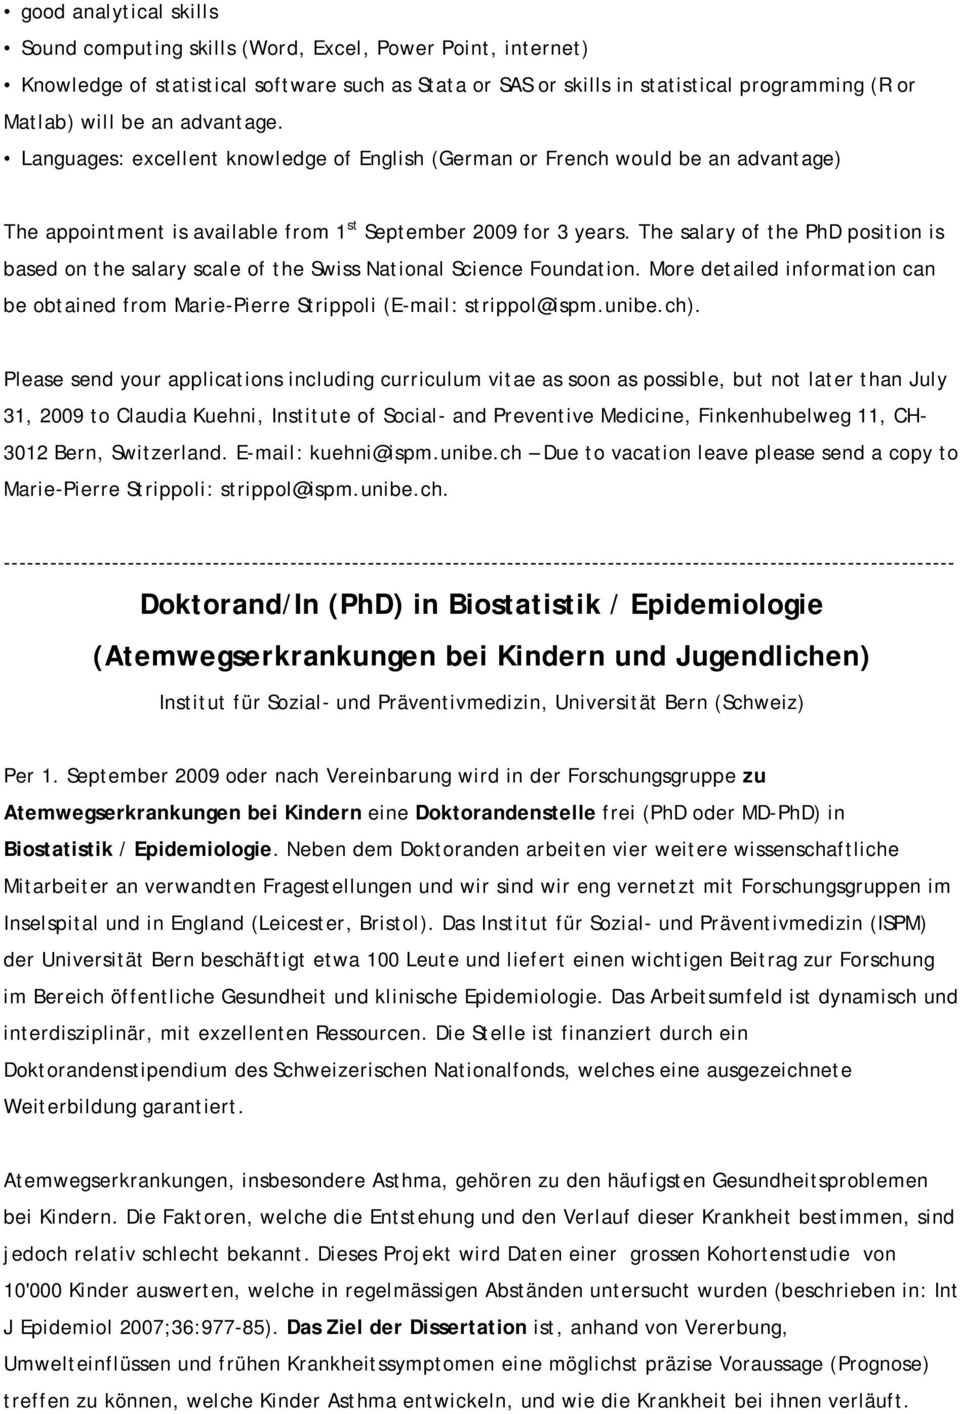 The salary of the PhD position is based on the salary scale of the Swiss National Science Foundation. More detailed information can be obtained from Marie-Pierre Strippoli (E-mail: strippol@ispm.